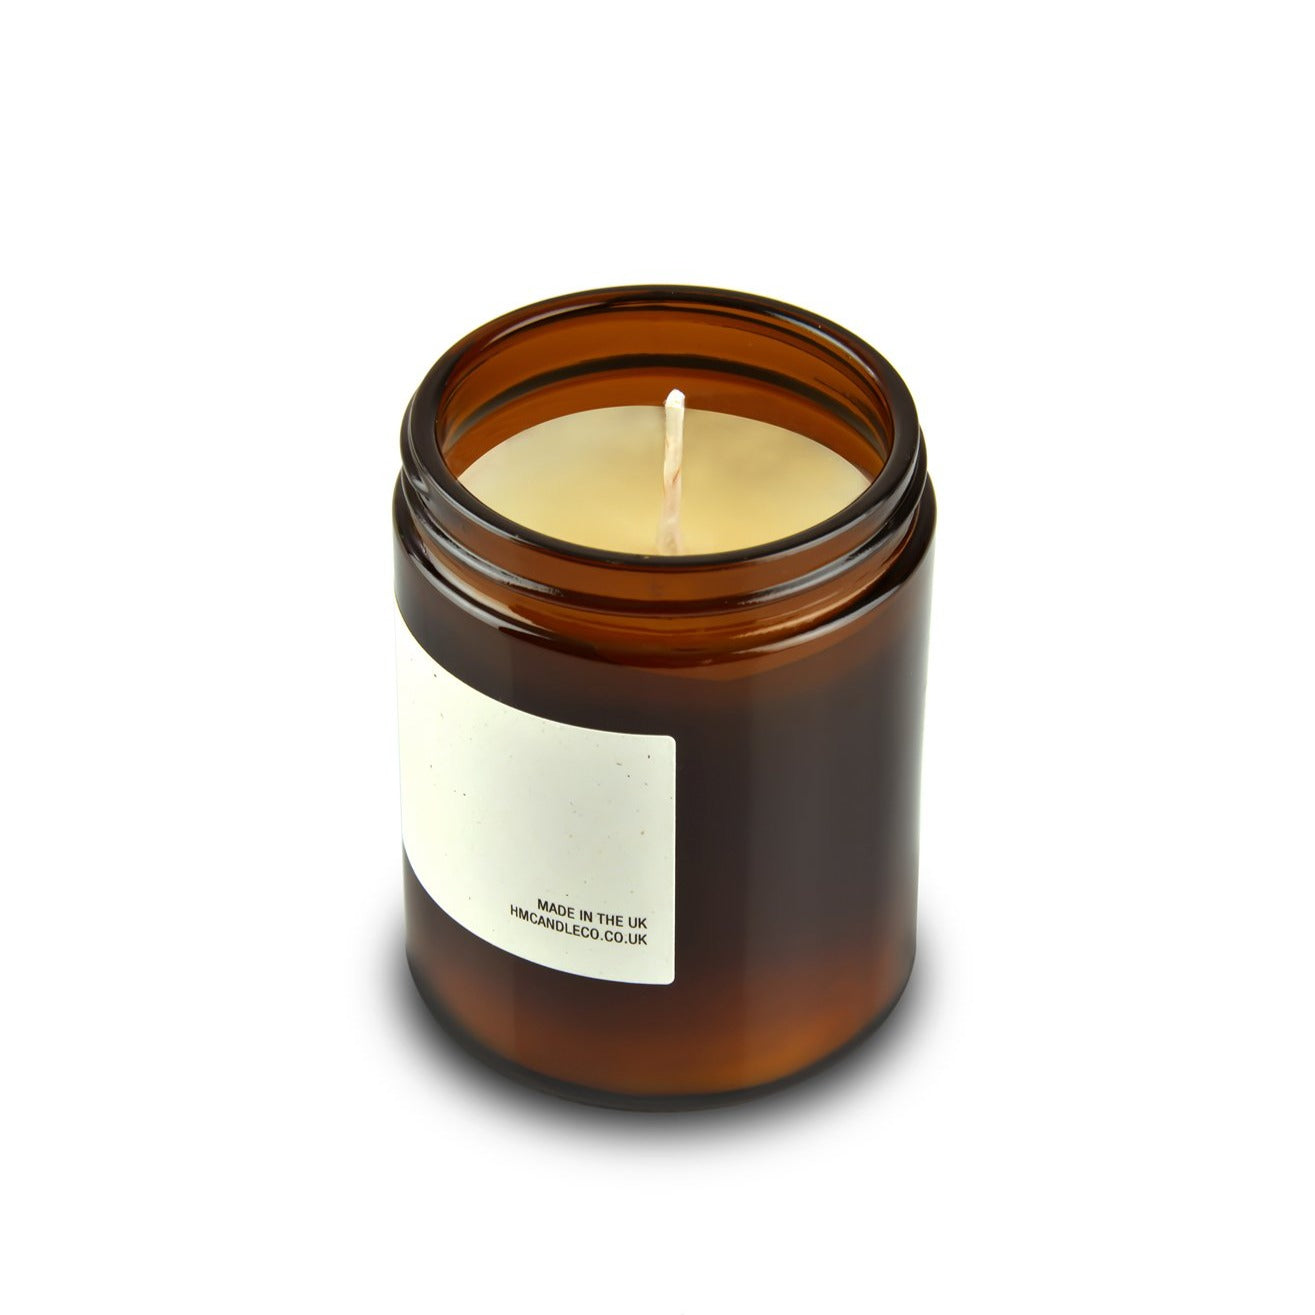 Sweet Neroli & Basil Soy Wax Candle in a Recycled Amber Glass Pot. Handmade in Shropshire